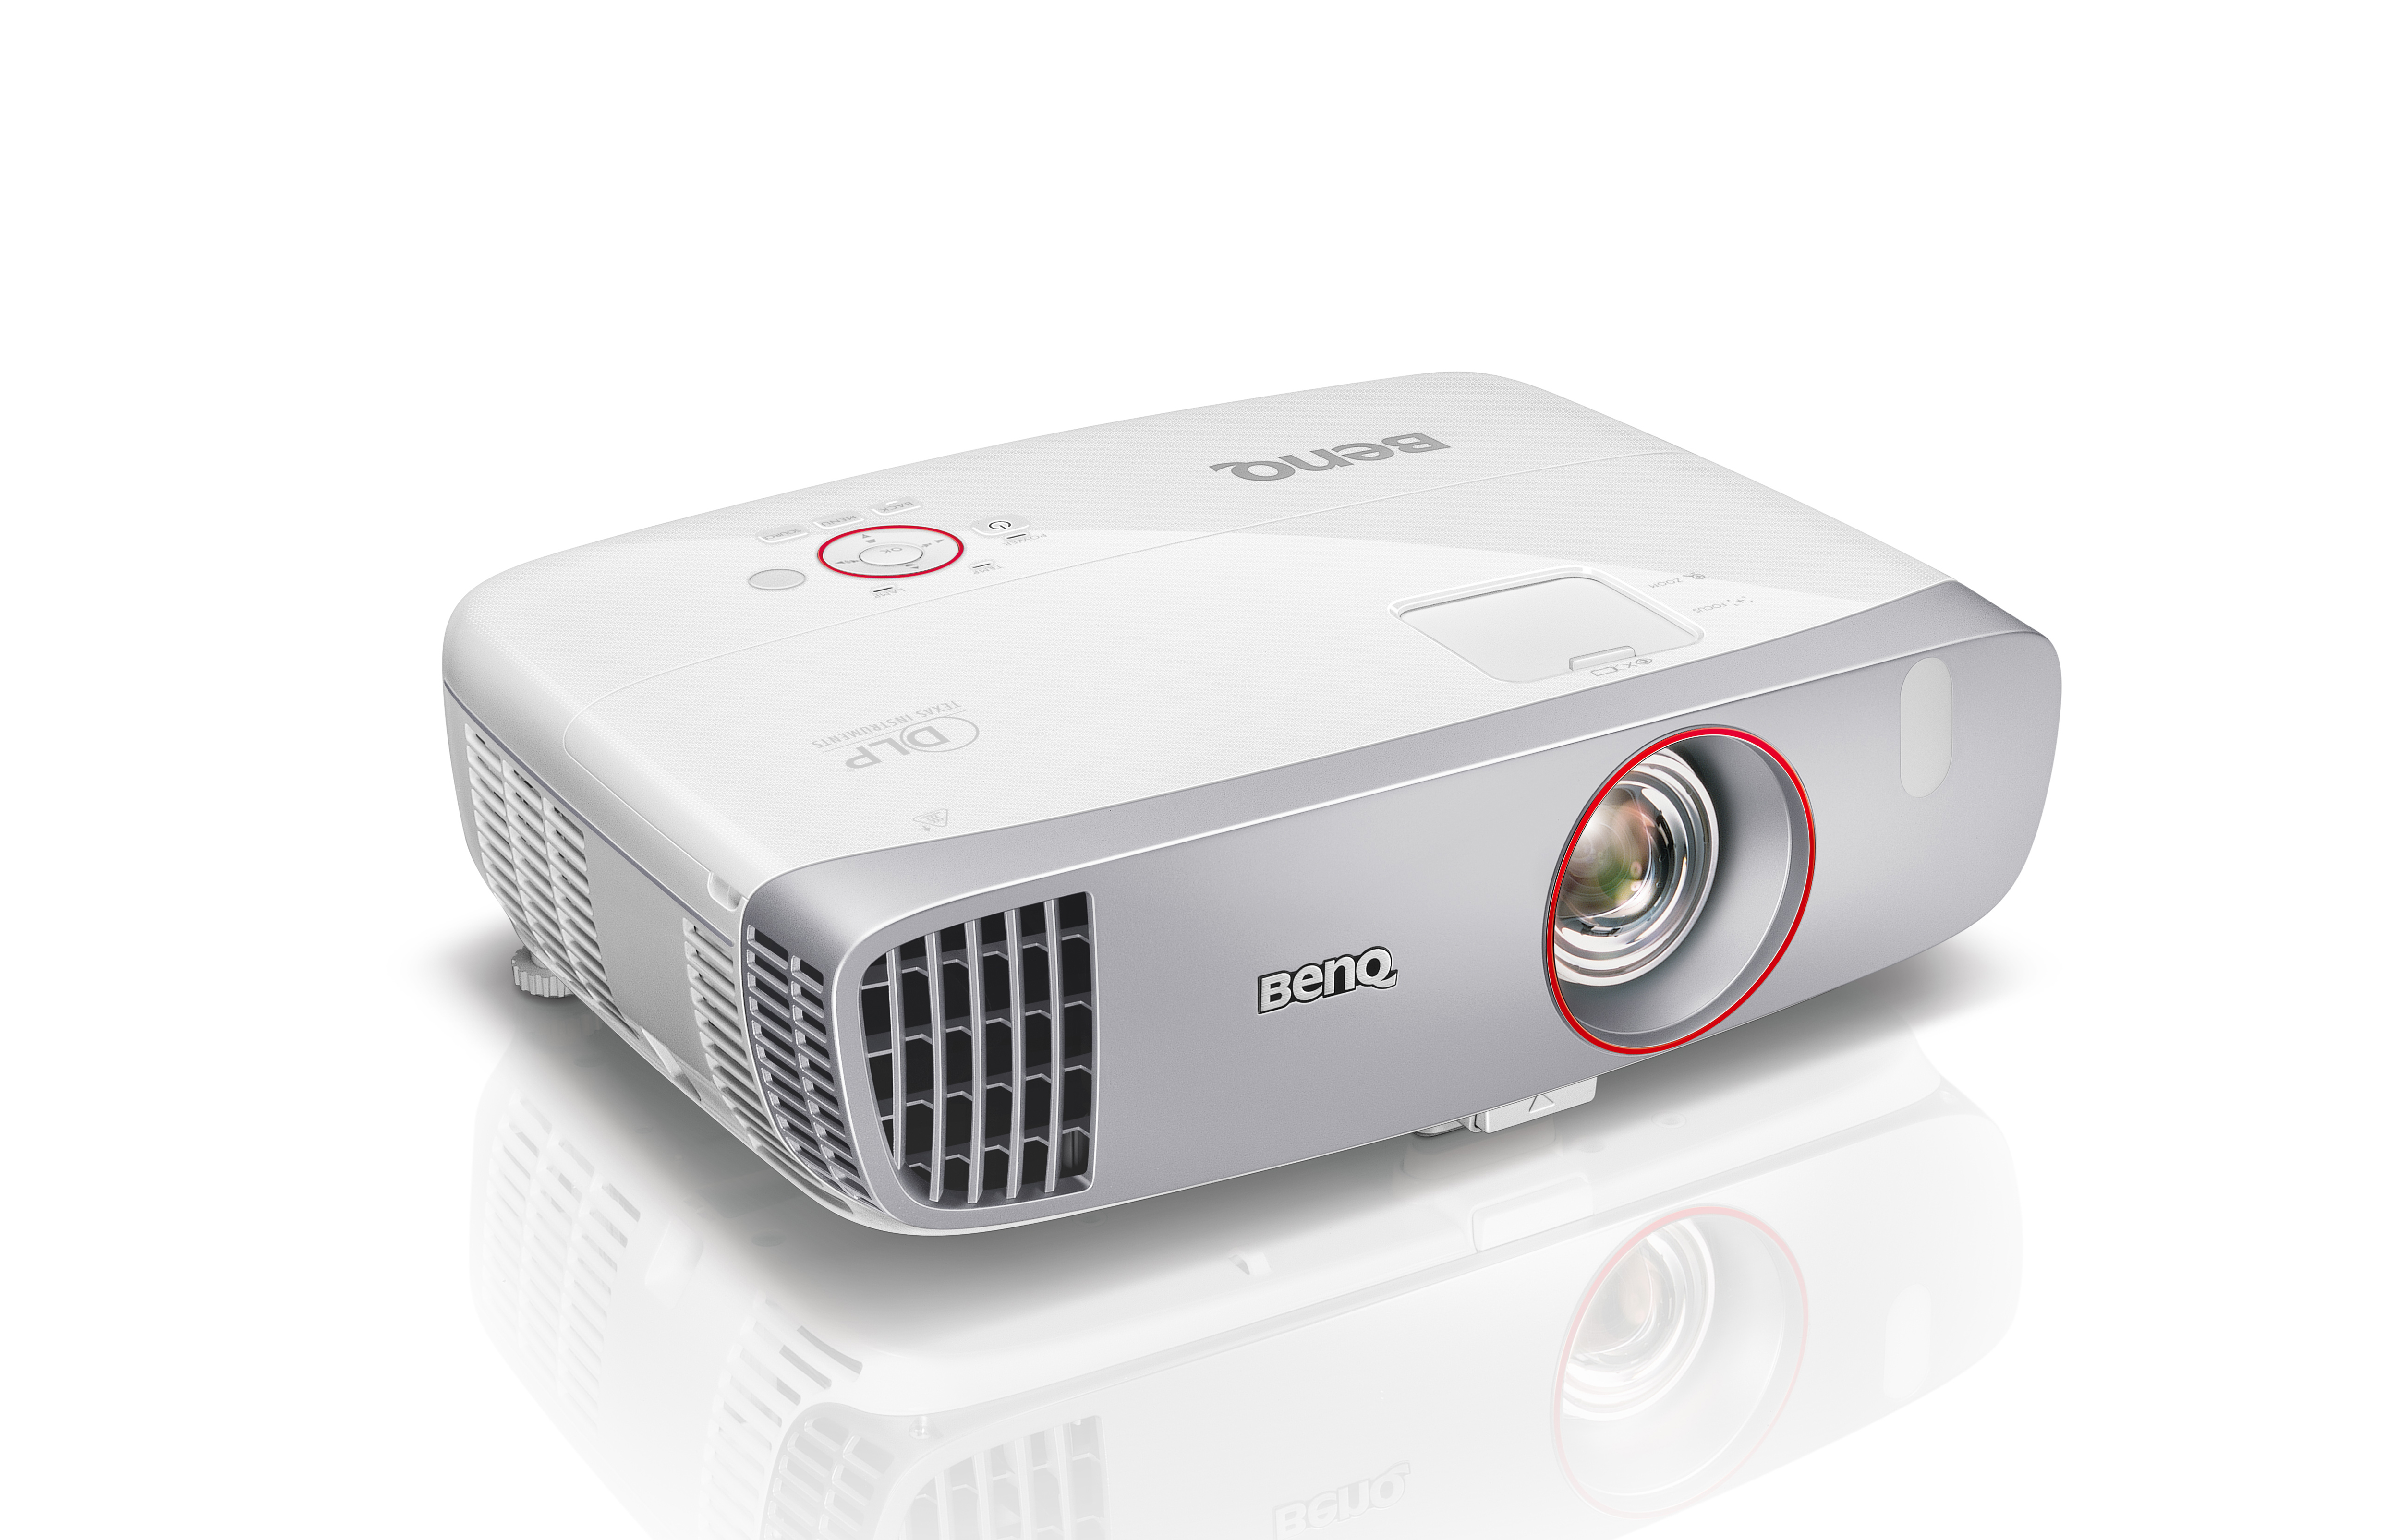 W1210ST 1080p Home Video Projector Best for Video Gaming Image